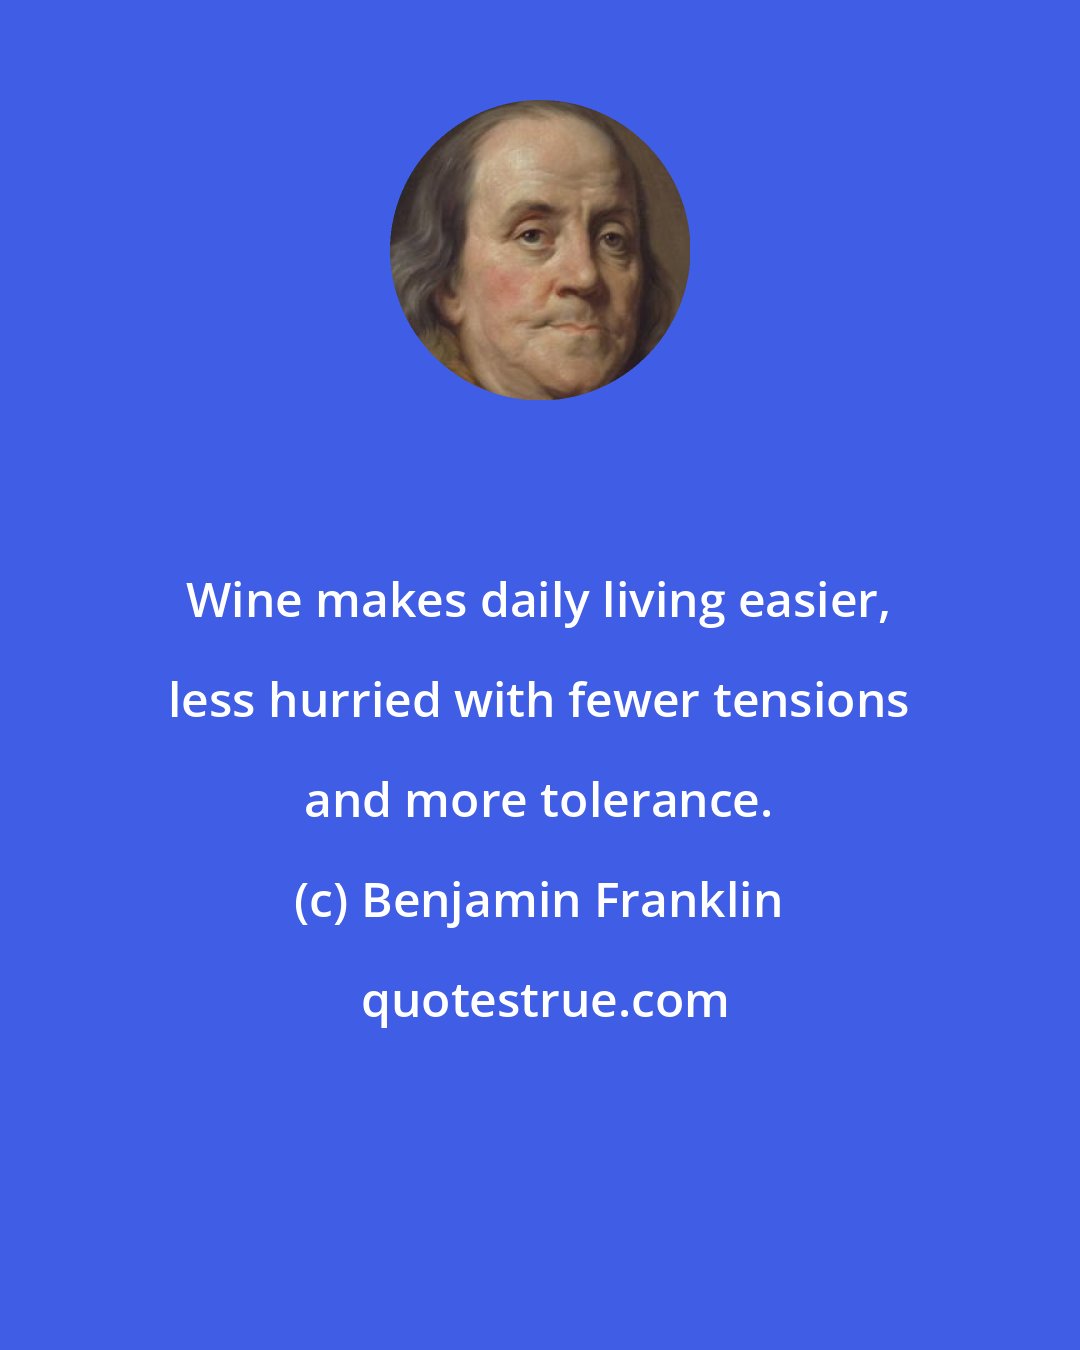 Benjamin Franklin: Wine makes daily living easier, less hurried with fewer tensions and more tolerance.